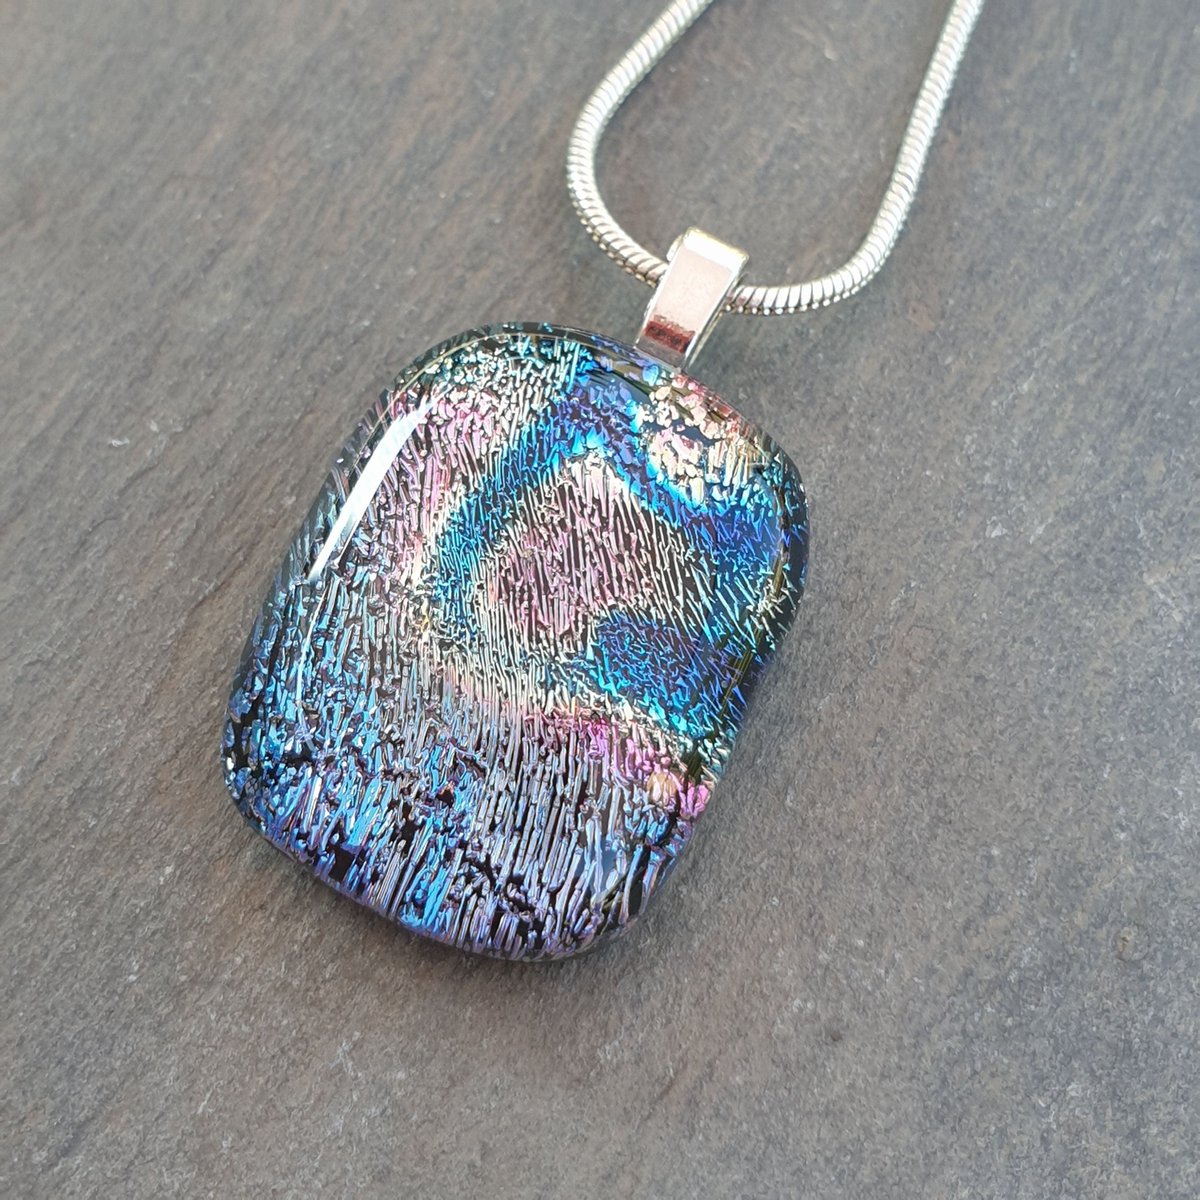 Beautiful shimmering colours within this unique handcrafted dichroic glass necklace. Lovely handcrafted pendant. #handmade #jewellery #etsy #shopindie #giftideas buff.ly/3sBwBmI